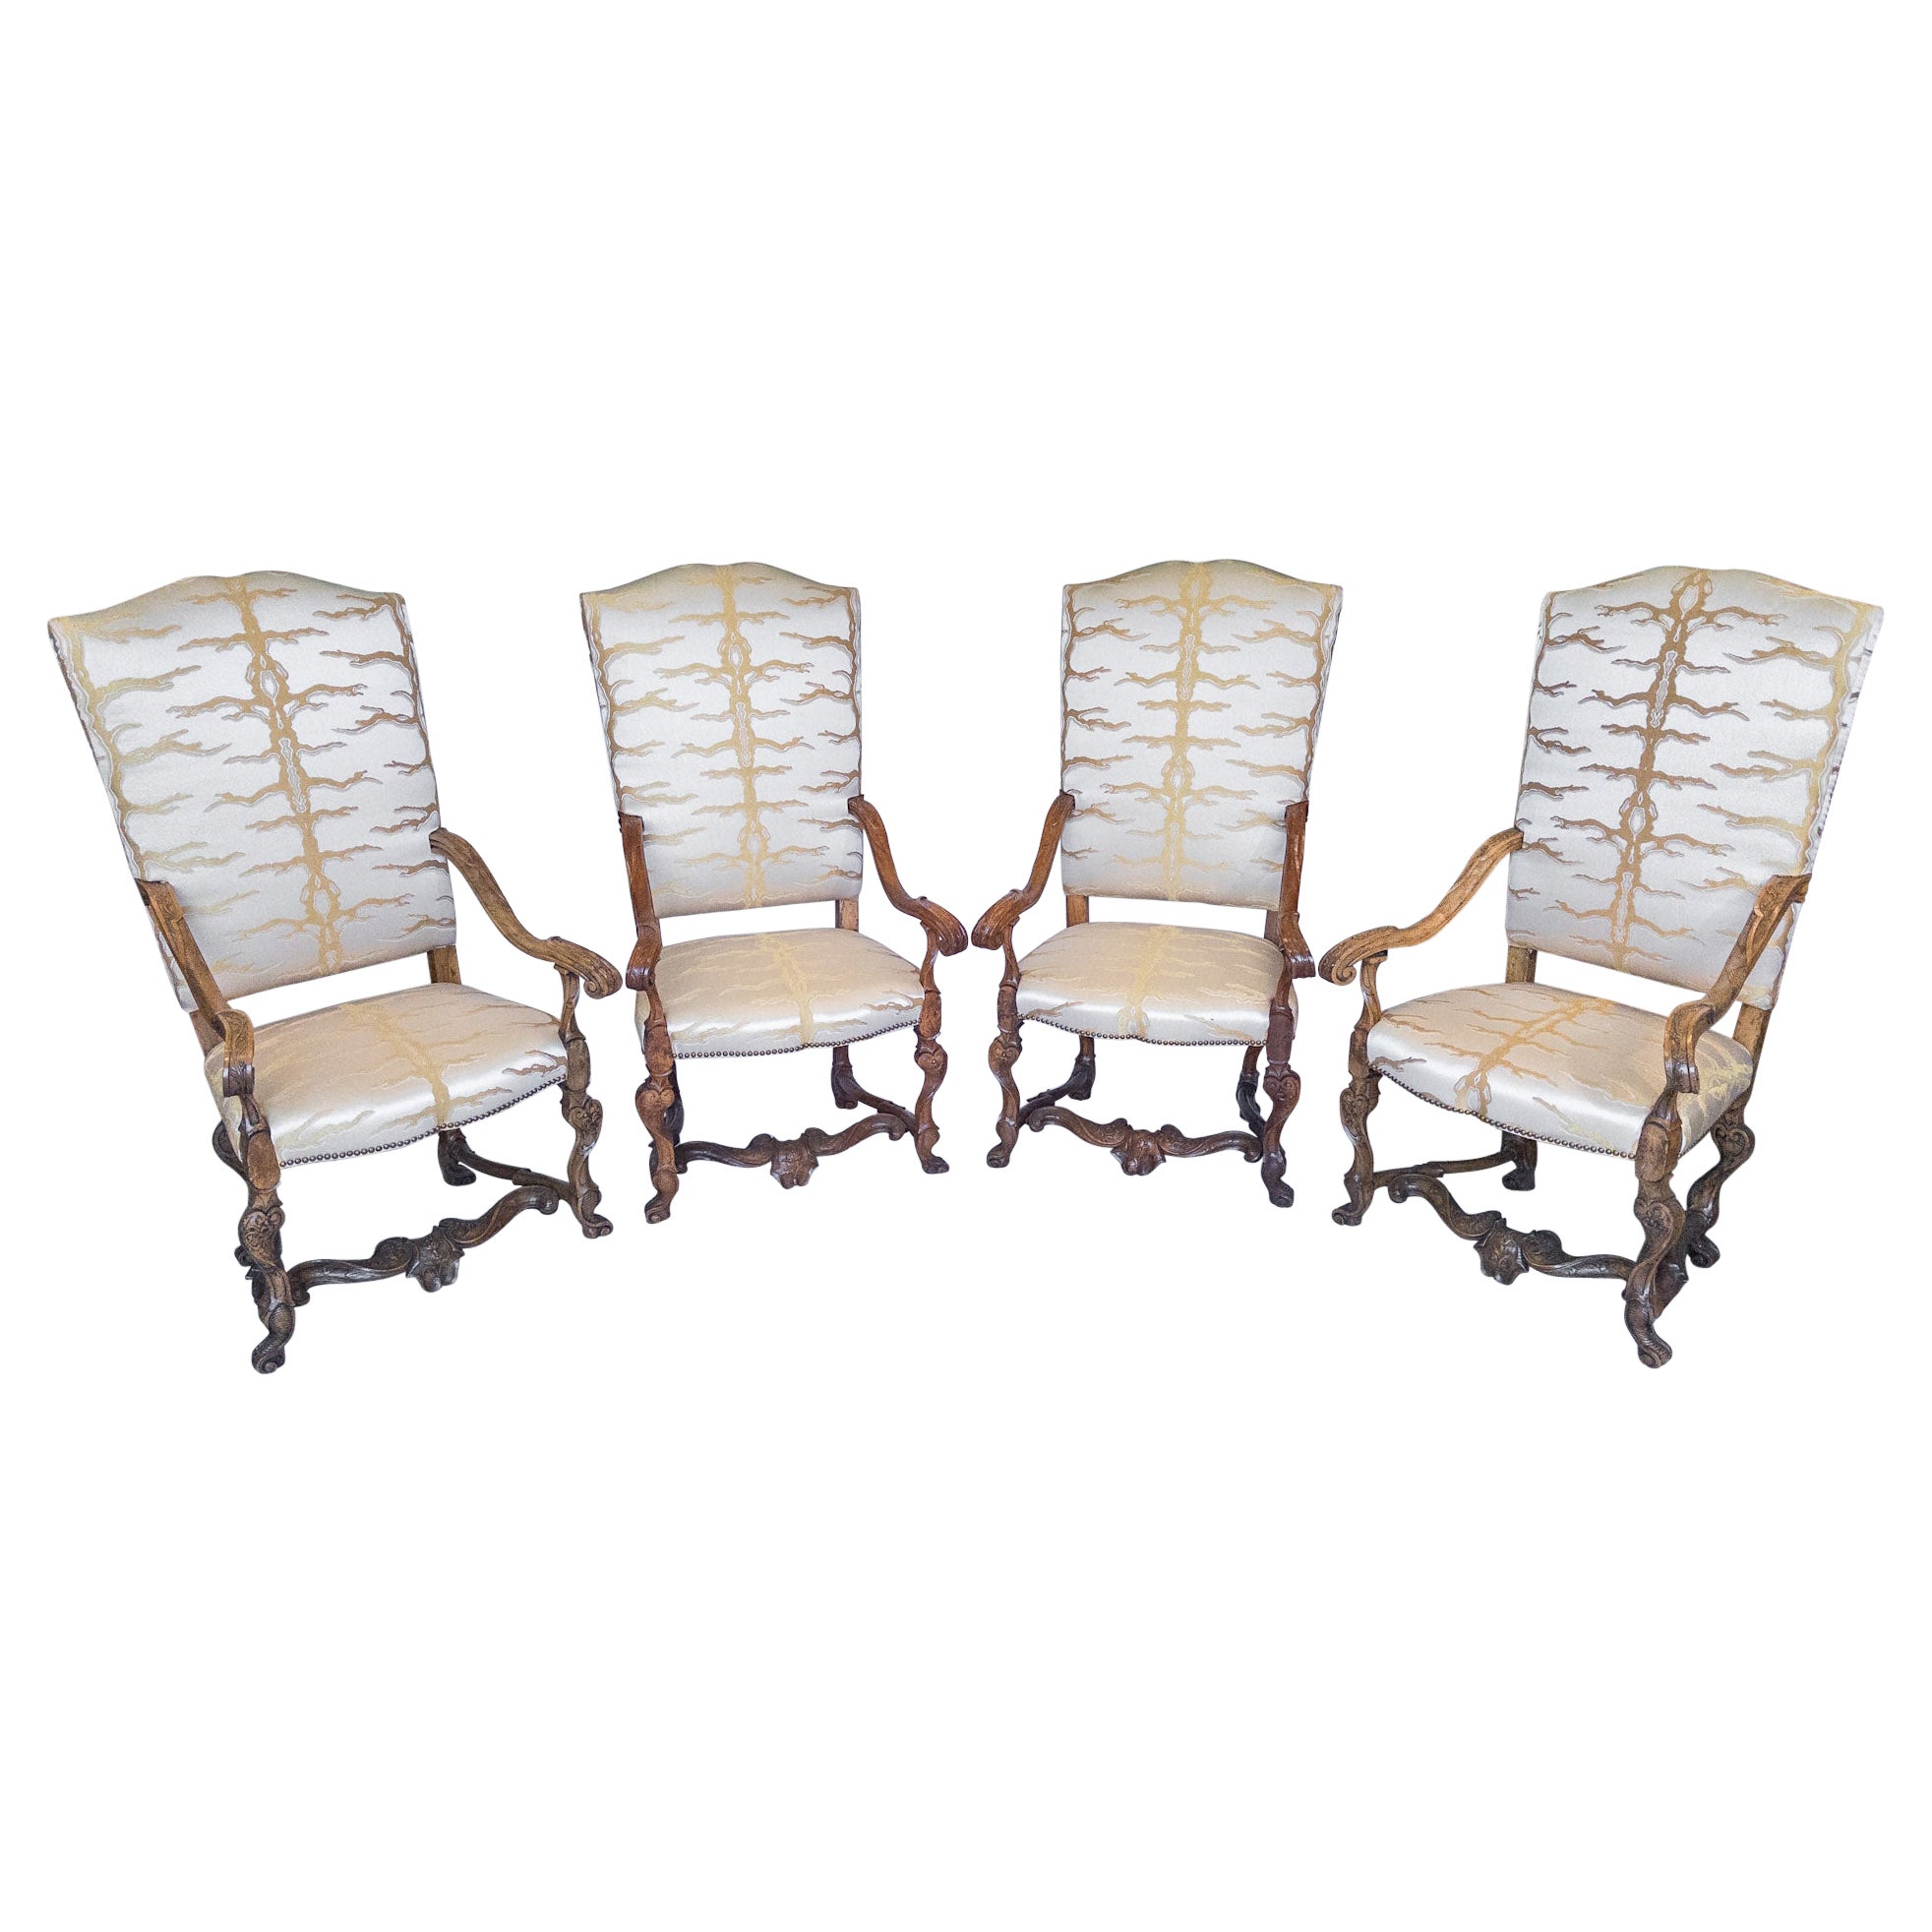 Rare Set of 4 19th Century Italian Baroque Carved Walnut Tall Arm Chairs For Sale